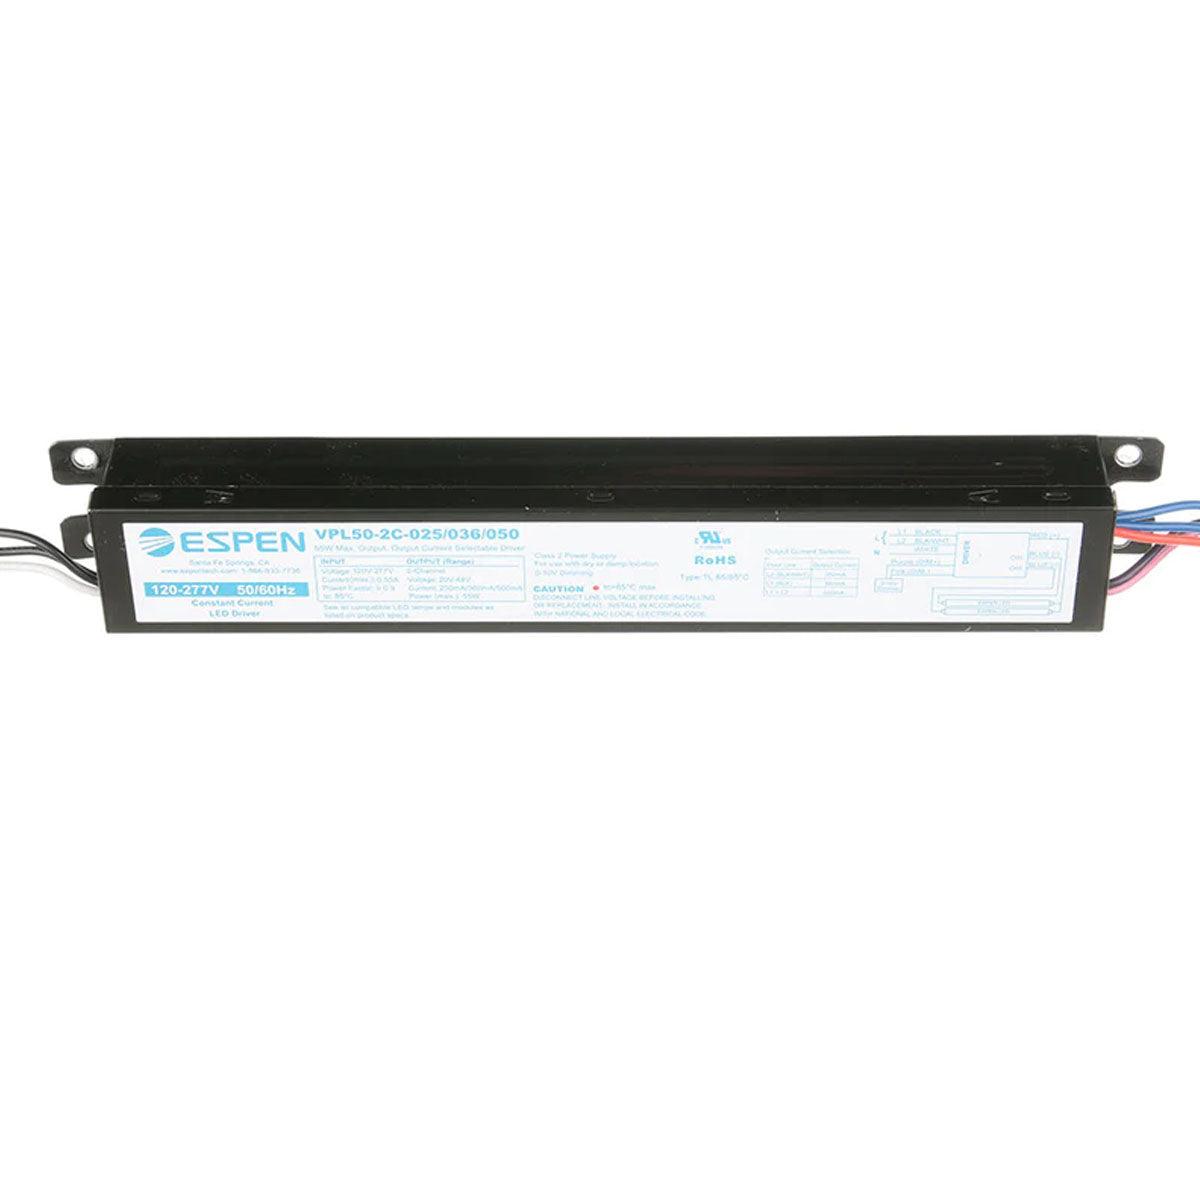 CoreTech VPL LED Driver, 35W, Selectable Constant Current 250-360mA, 0-10V Dimming, 2 Channels, 120-277V Input